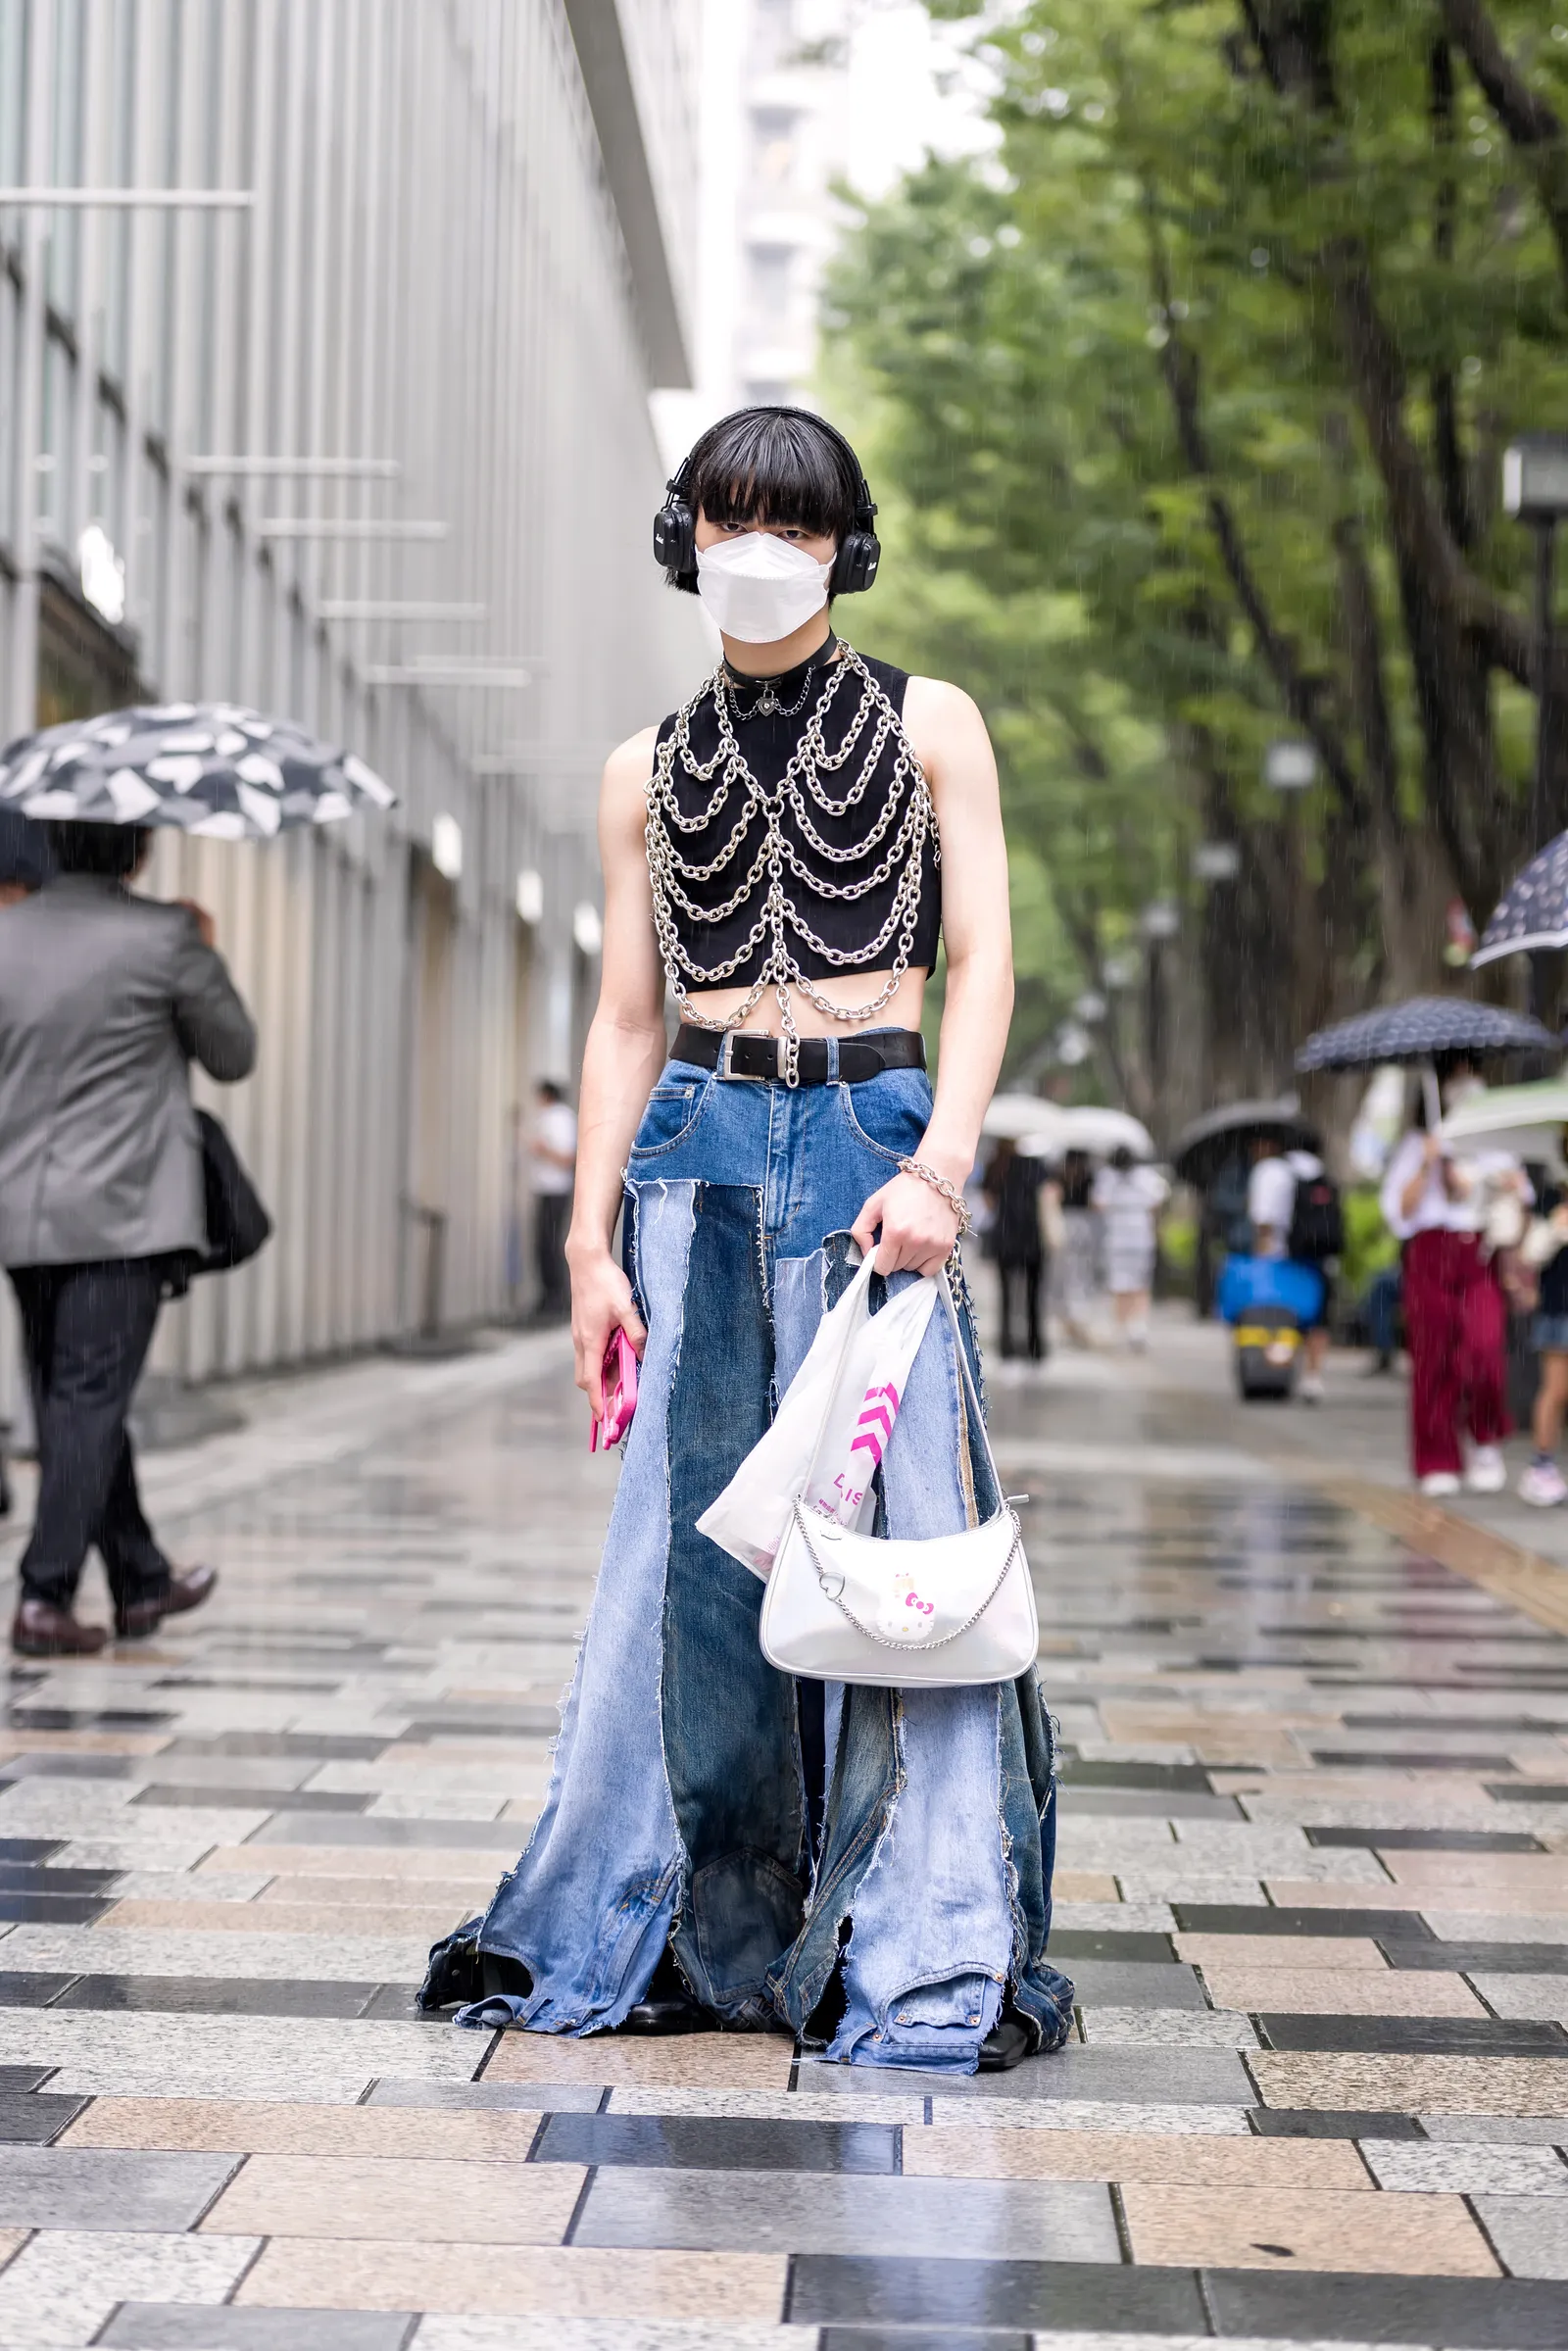 The Top 10 Street Style Looks From Tokyo Fashion Week - Voir Fashion